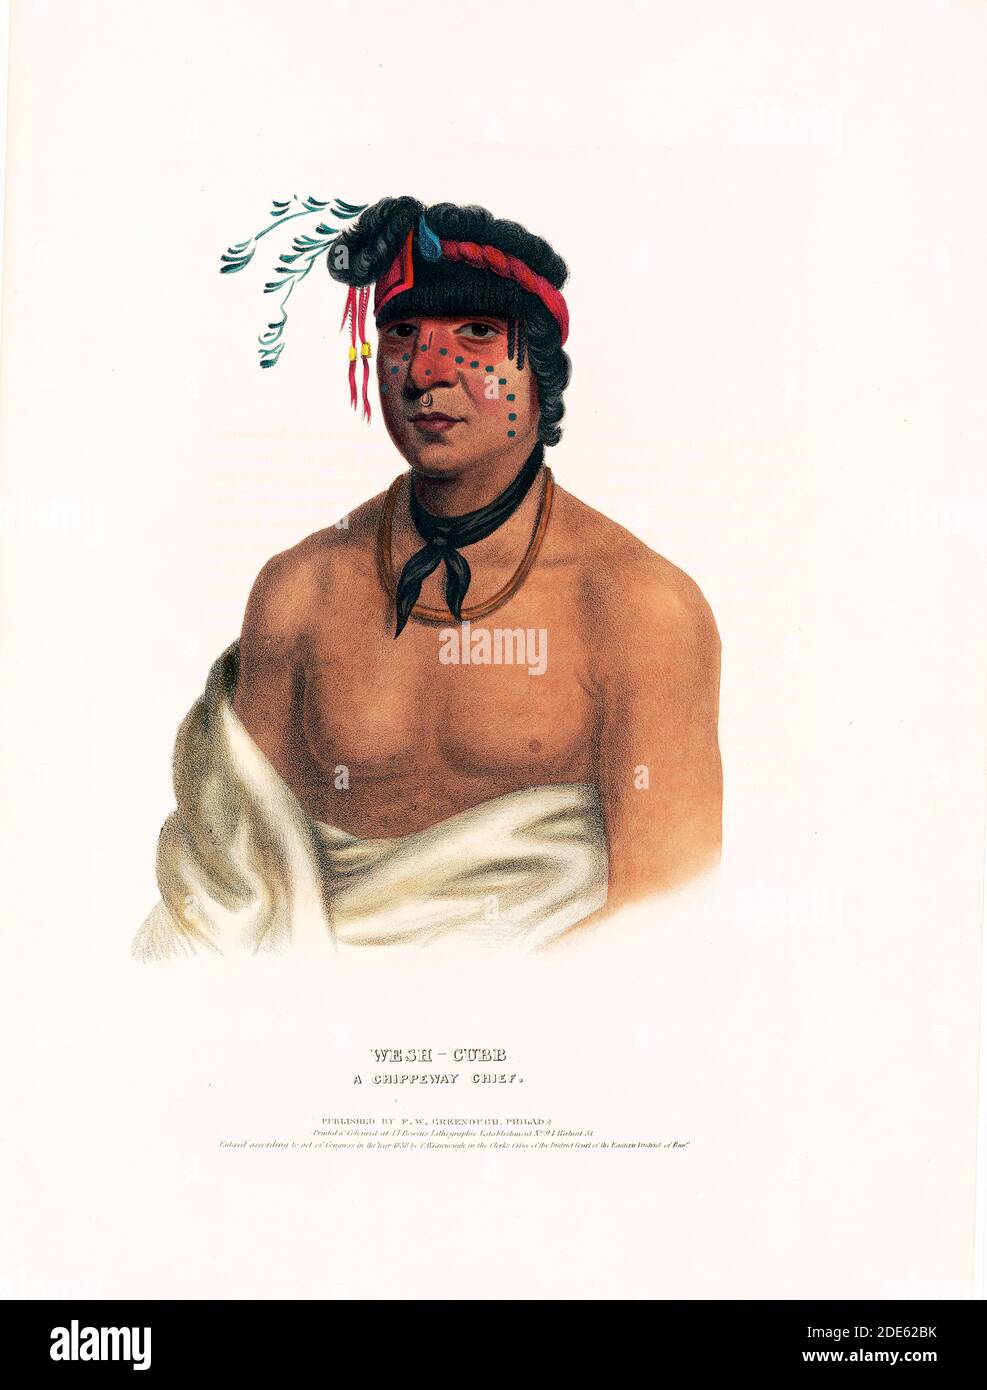 Print shows Wesh-Cubb, a Chippeway chief, half-length portrait, facing front, wearing a twisted band around his hair, a necktie, and holding a blanket off his shoulders. Stock Photo